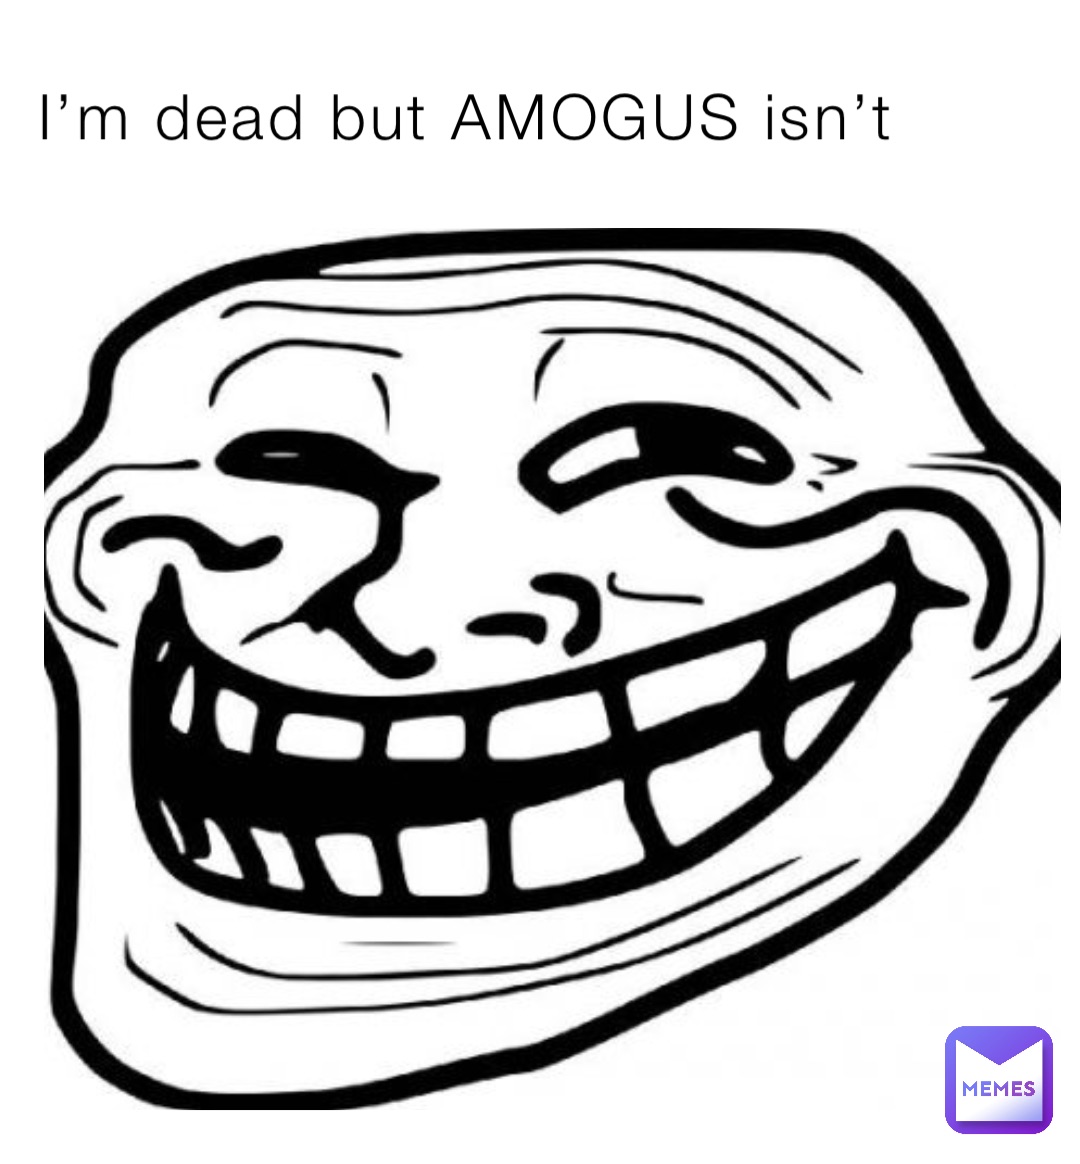 I’m dead but AMOGUS isn’t